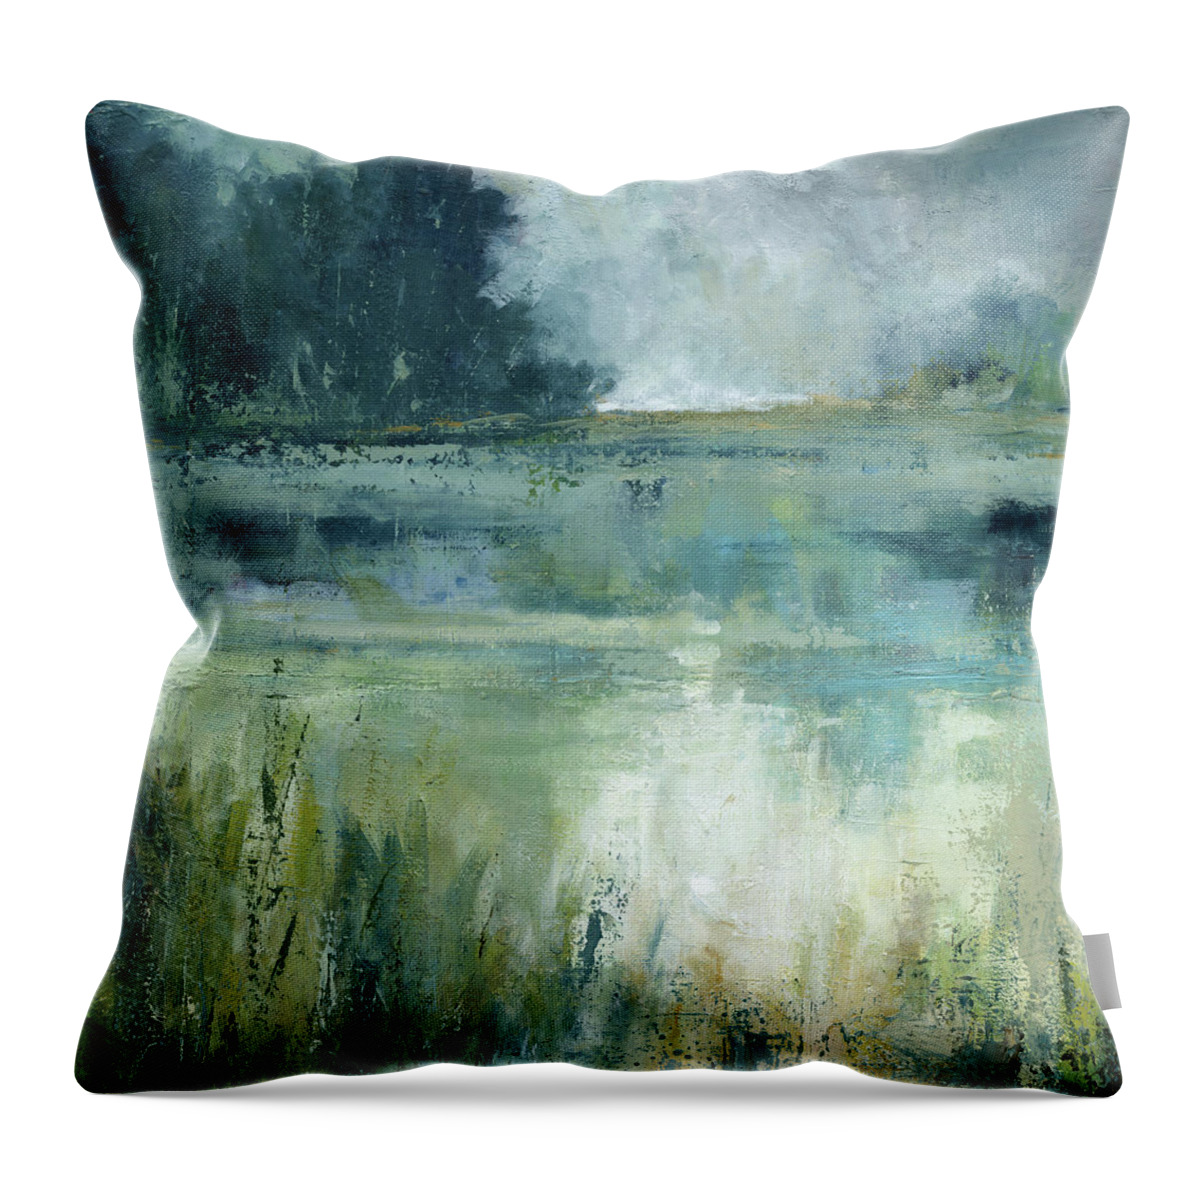 Landscape Trees Water Reflection Teals Indigo Green Contemporary Textured Throw Pillow featuring the painting Reflections Edge #1 by Carol Robinson